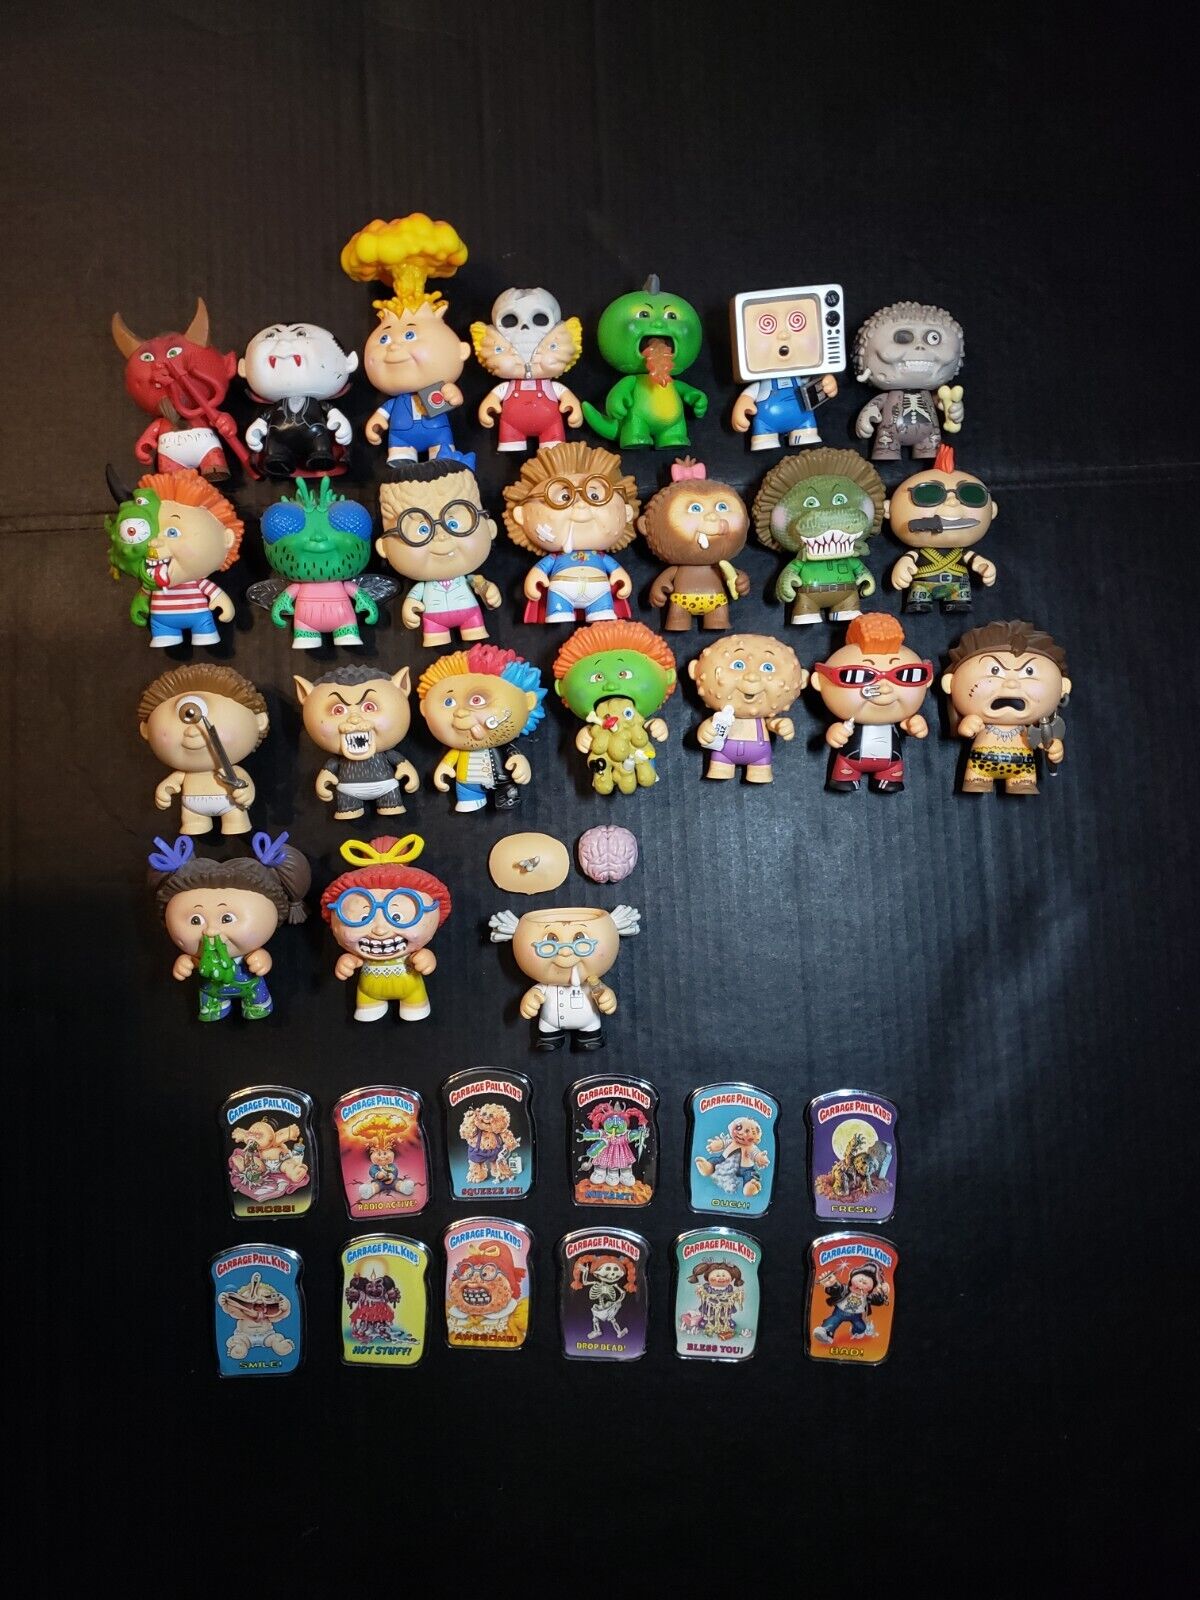 FUNKO GARBAGE PAIL KIDS VINYL MINIS Series 1 And 2 - SET OF 24 With Pins 